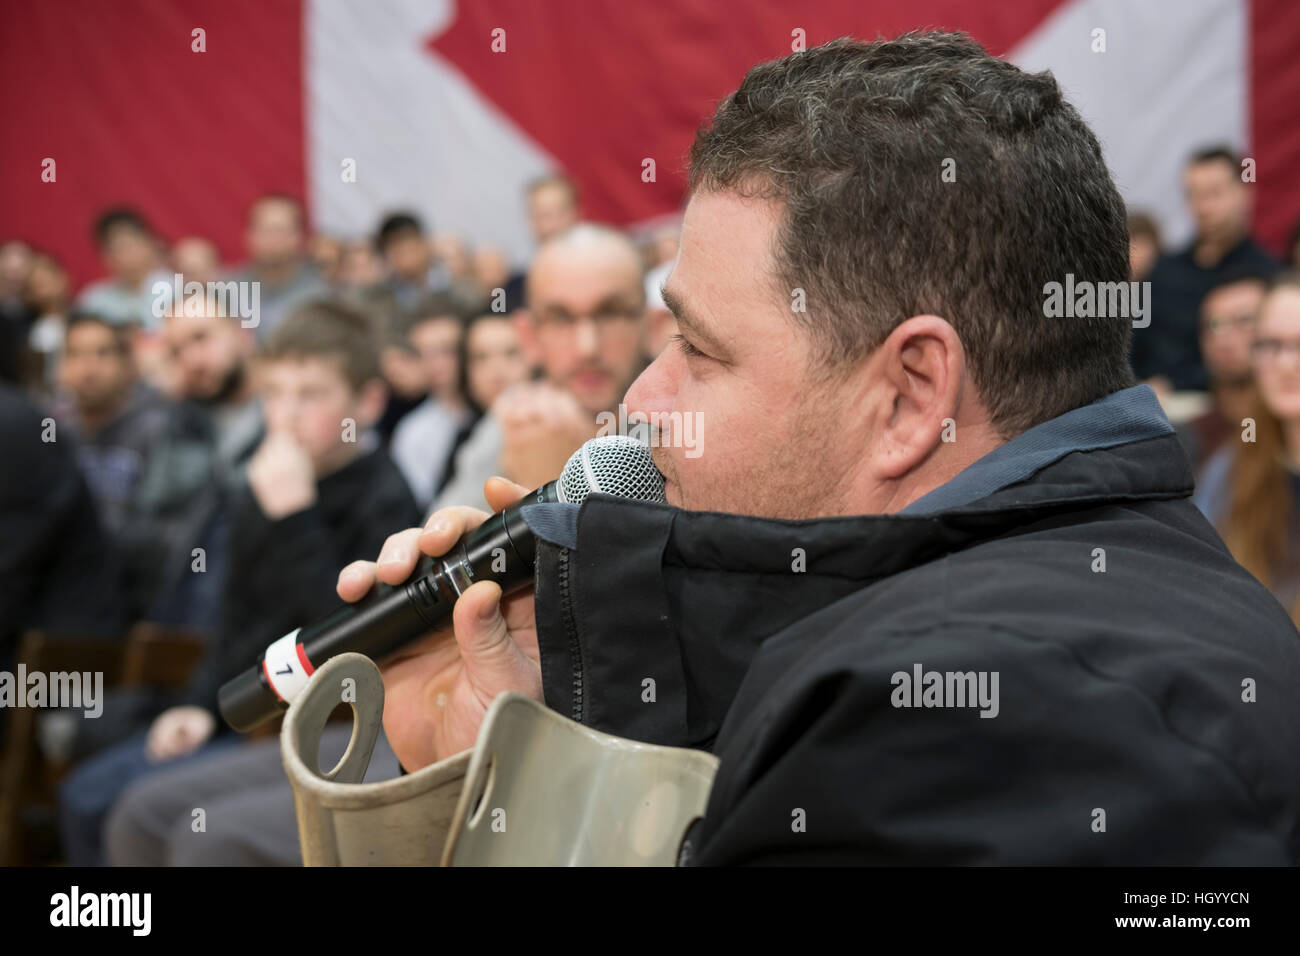 London, Ontario, Canada, 13th January, 2017. A recent Syrian refugee asks a question to the Prime Minister of Canada in London, Ontario, during a town hall Q&A. London was one of the Prime Minister's stops as part of his cross-country tour. Credit: Rubens Alarcon/Alamy Live News Stock Photo